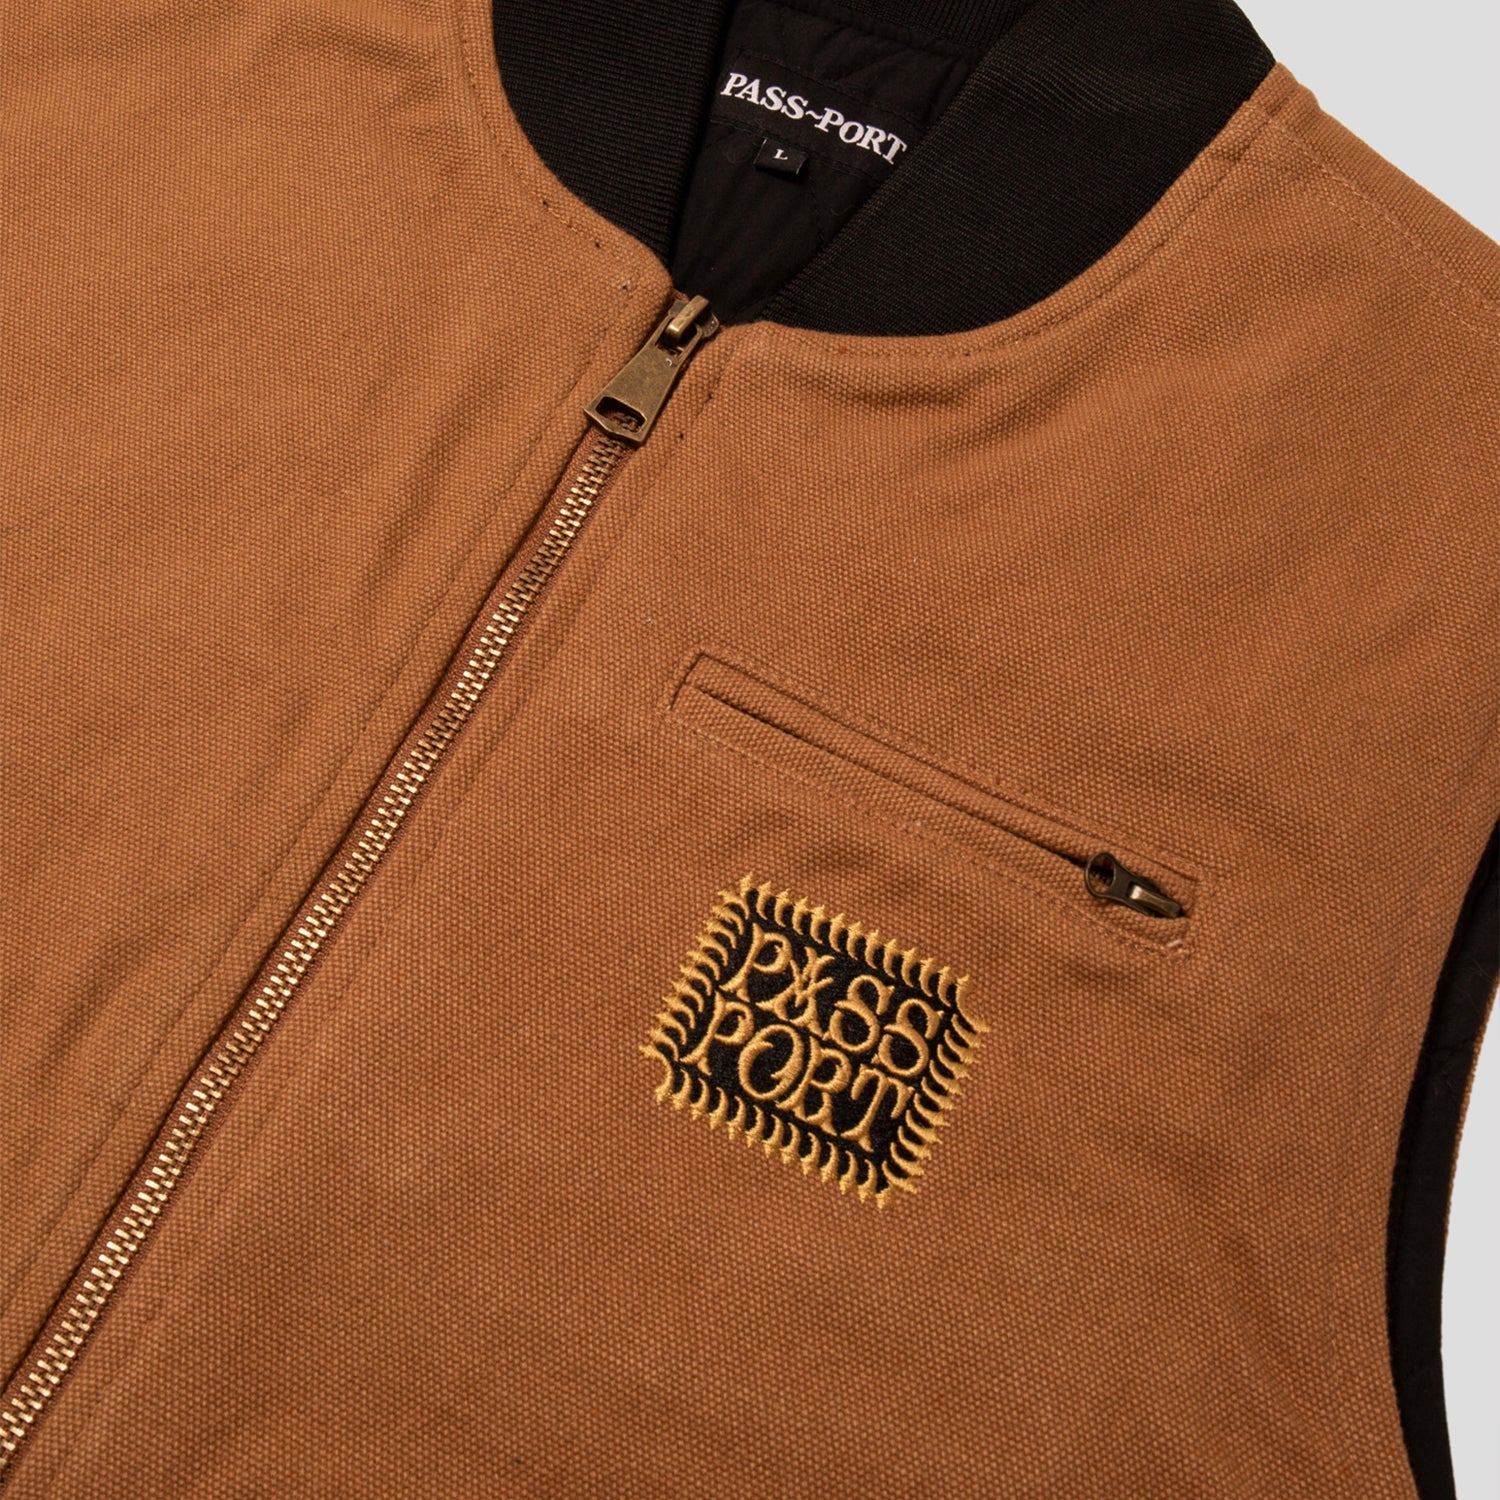 Tooth & Nail Packers Vest (Caramel)